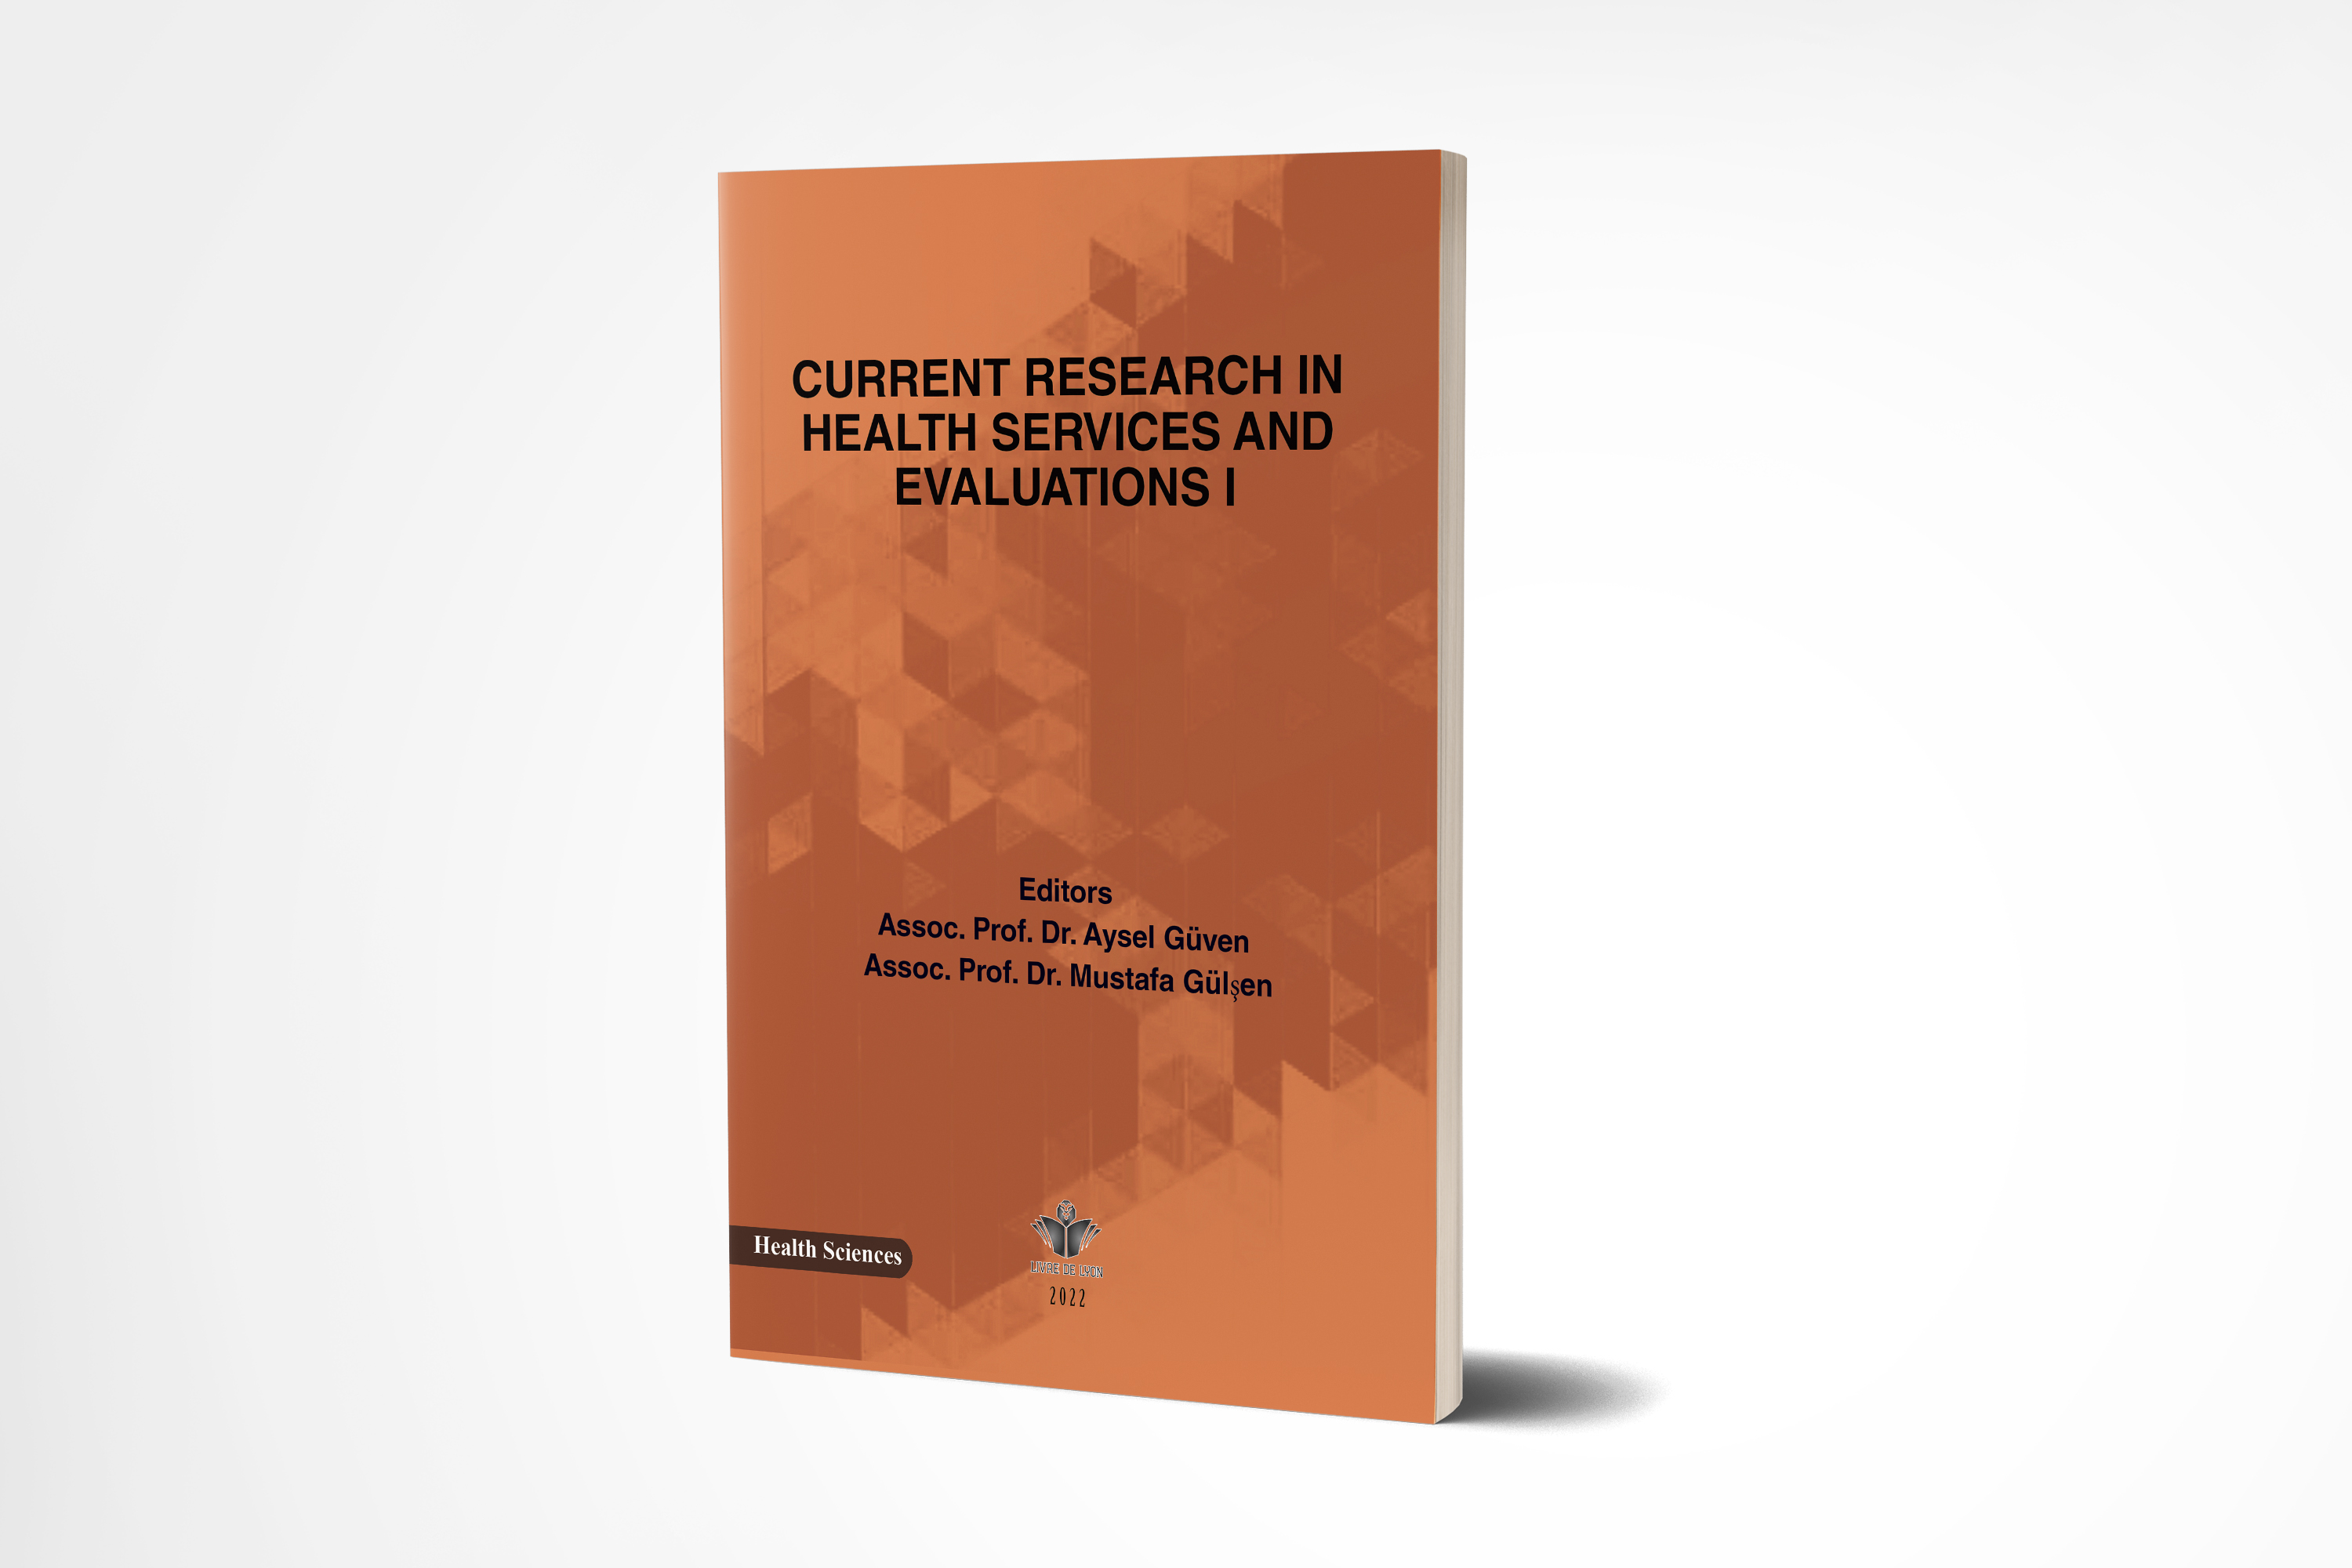  Current Research in Health Services and Evaluations I